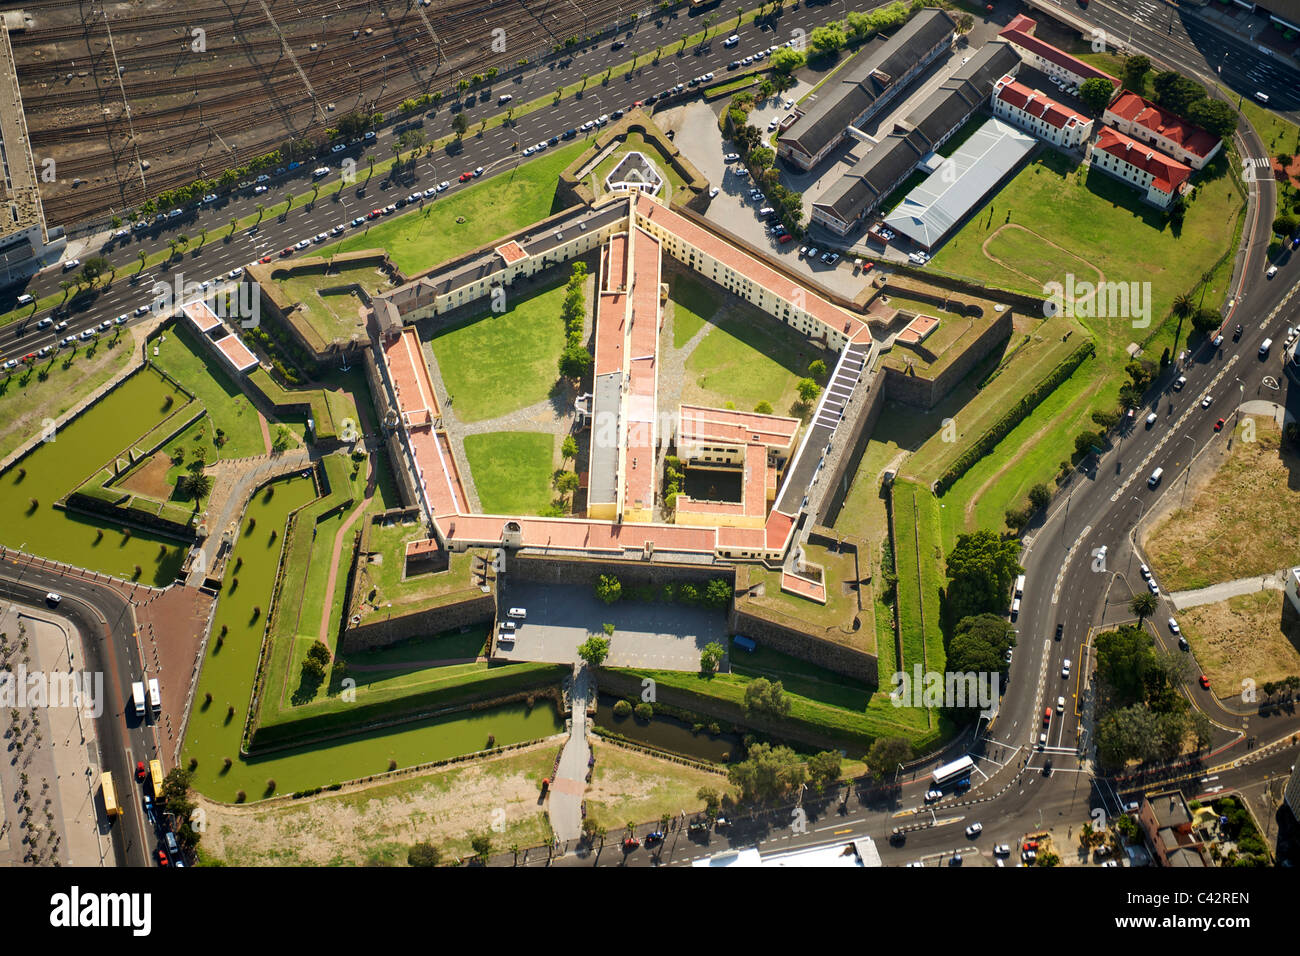 Aerial view of the Castle in Cape Town, South Africa. It was built by the Dutch who settled the Cape in the mid 17th century. Stock Photo